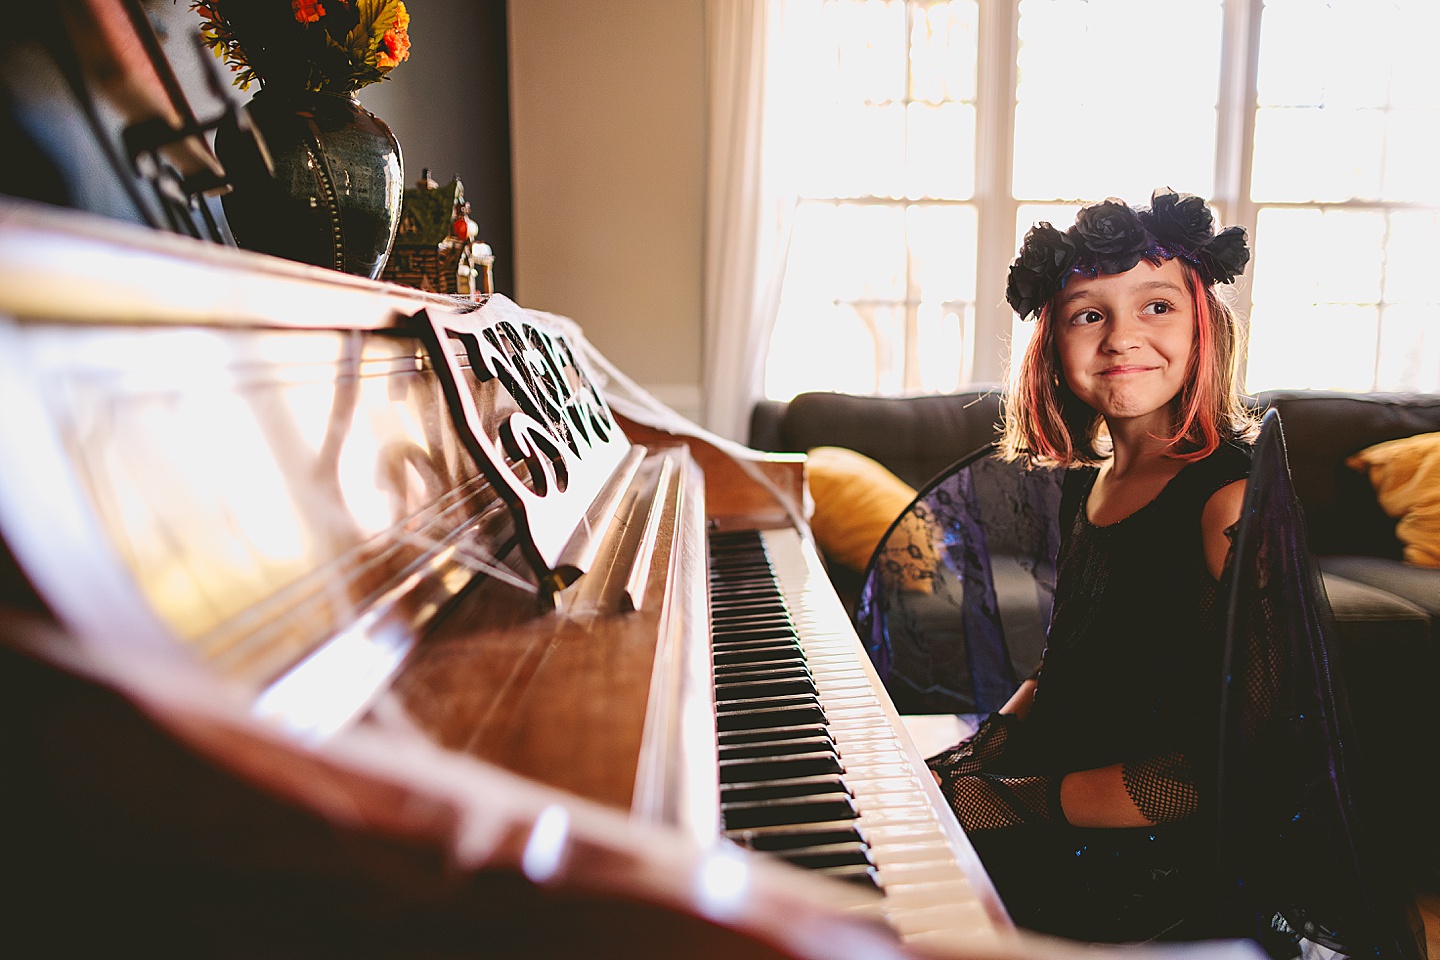 Girl in a dark fairy costume with black wings sits next to the piano and smiles while wearing black flower crown